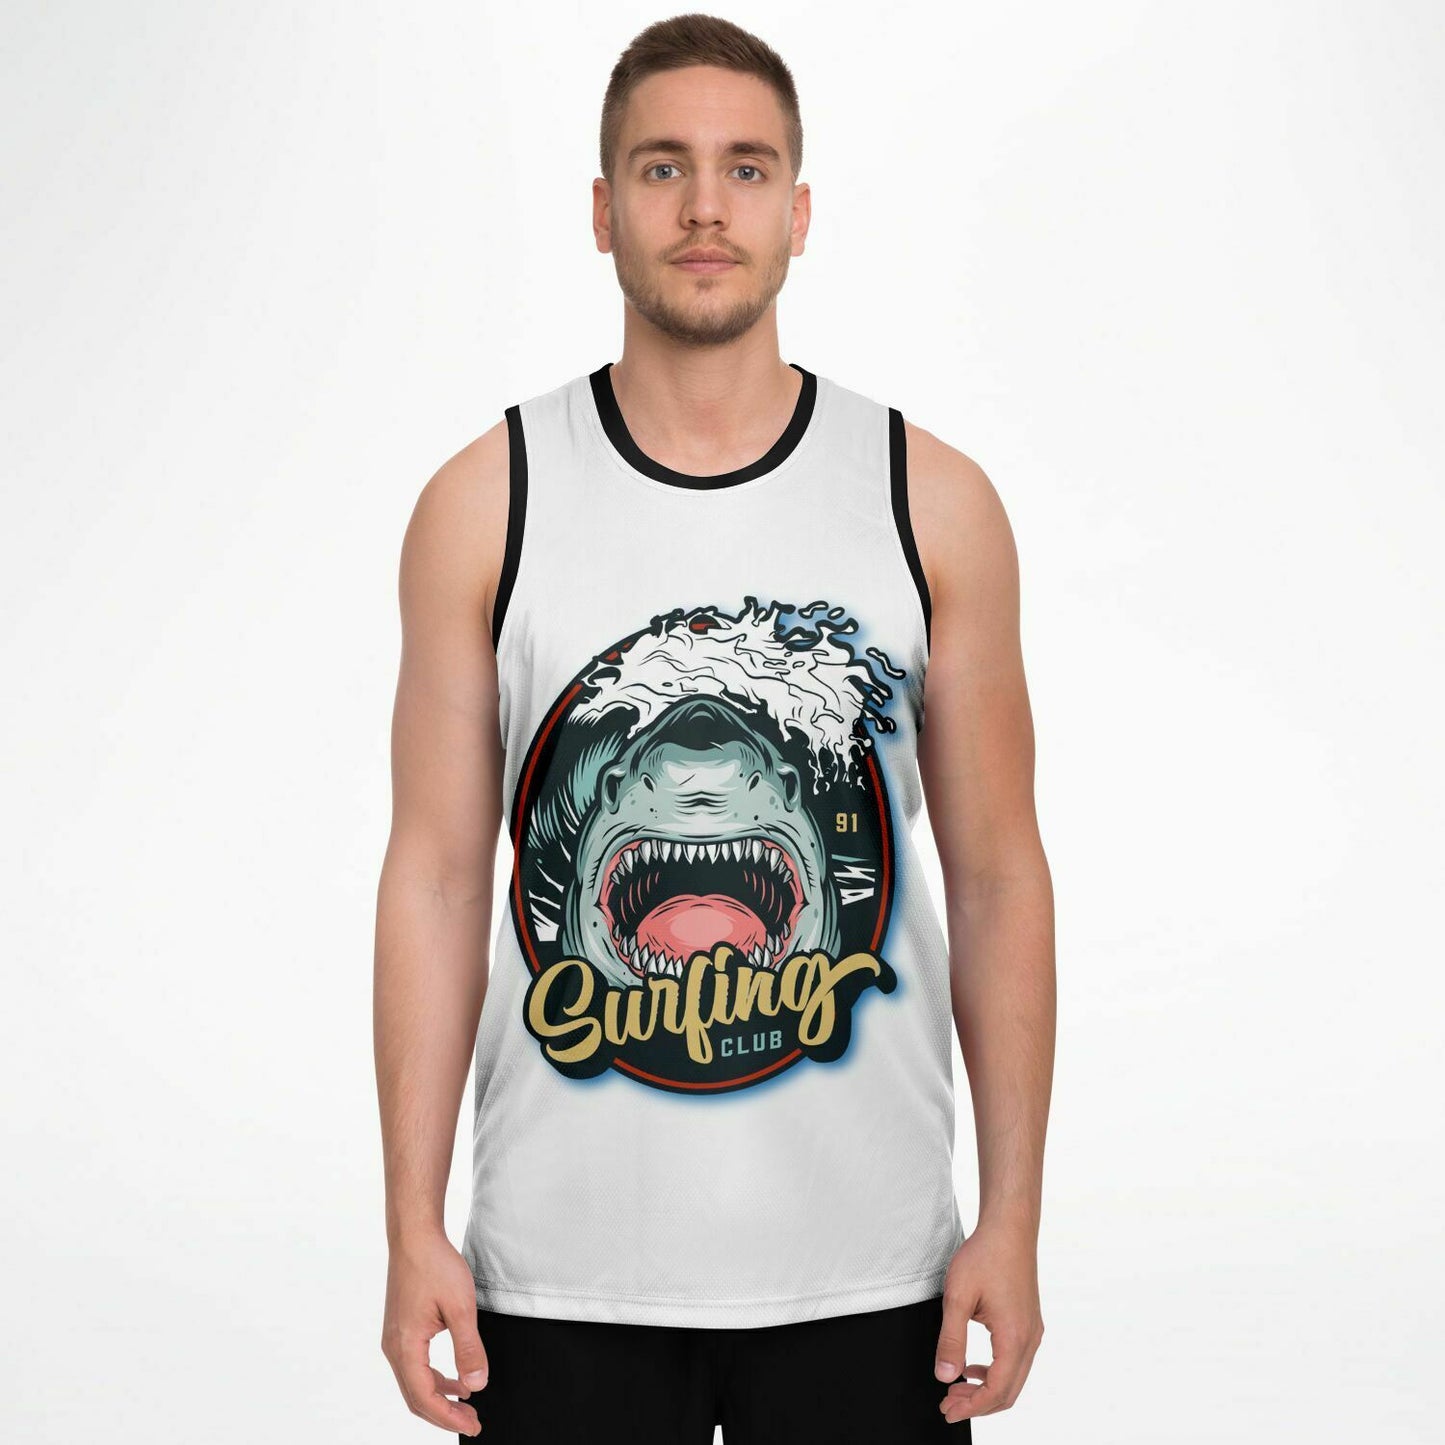 Surfing Club Basketball Tank Top with shark breaching a wave. Very cool! 